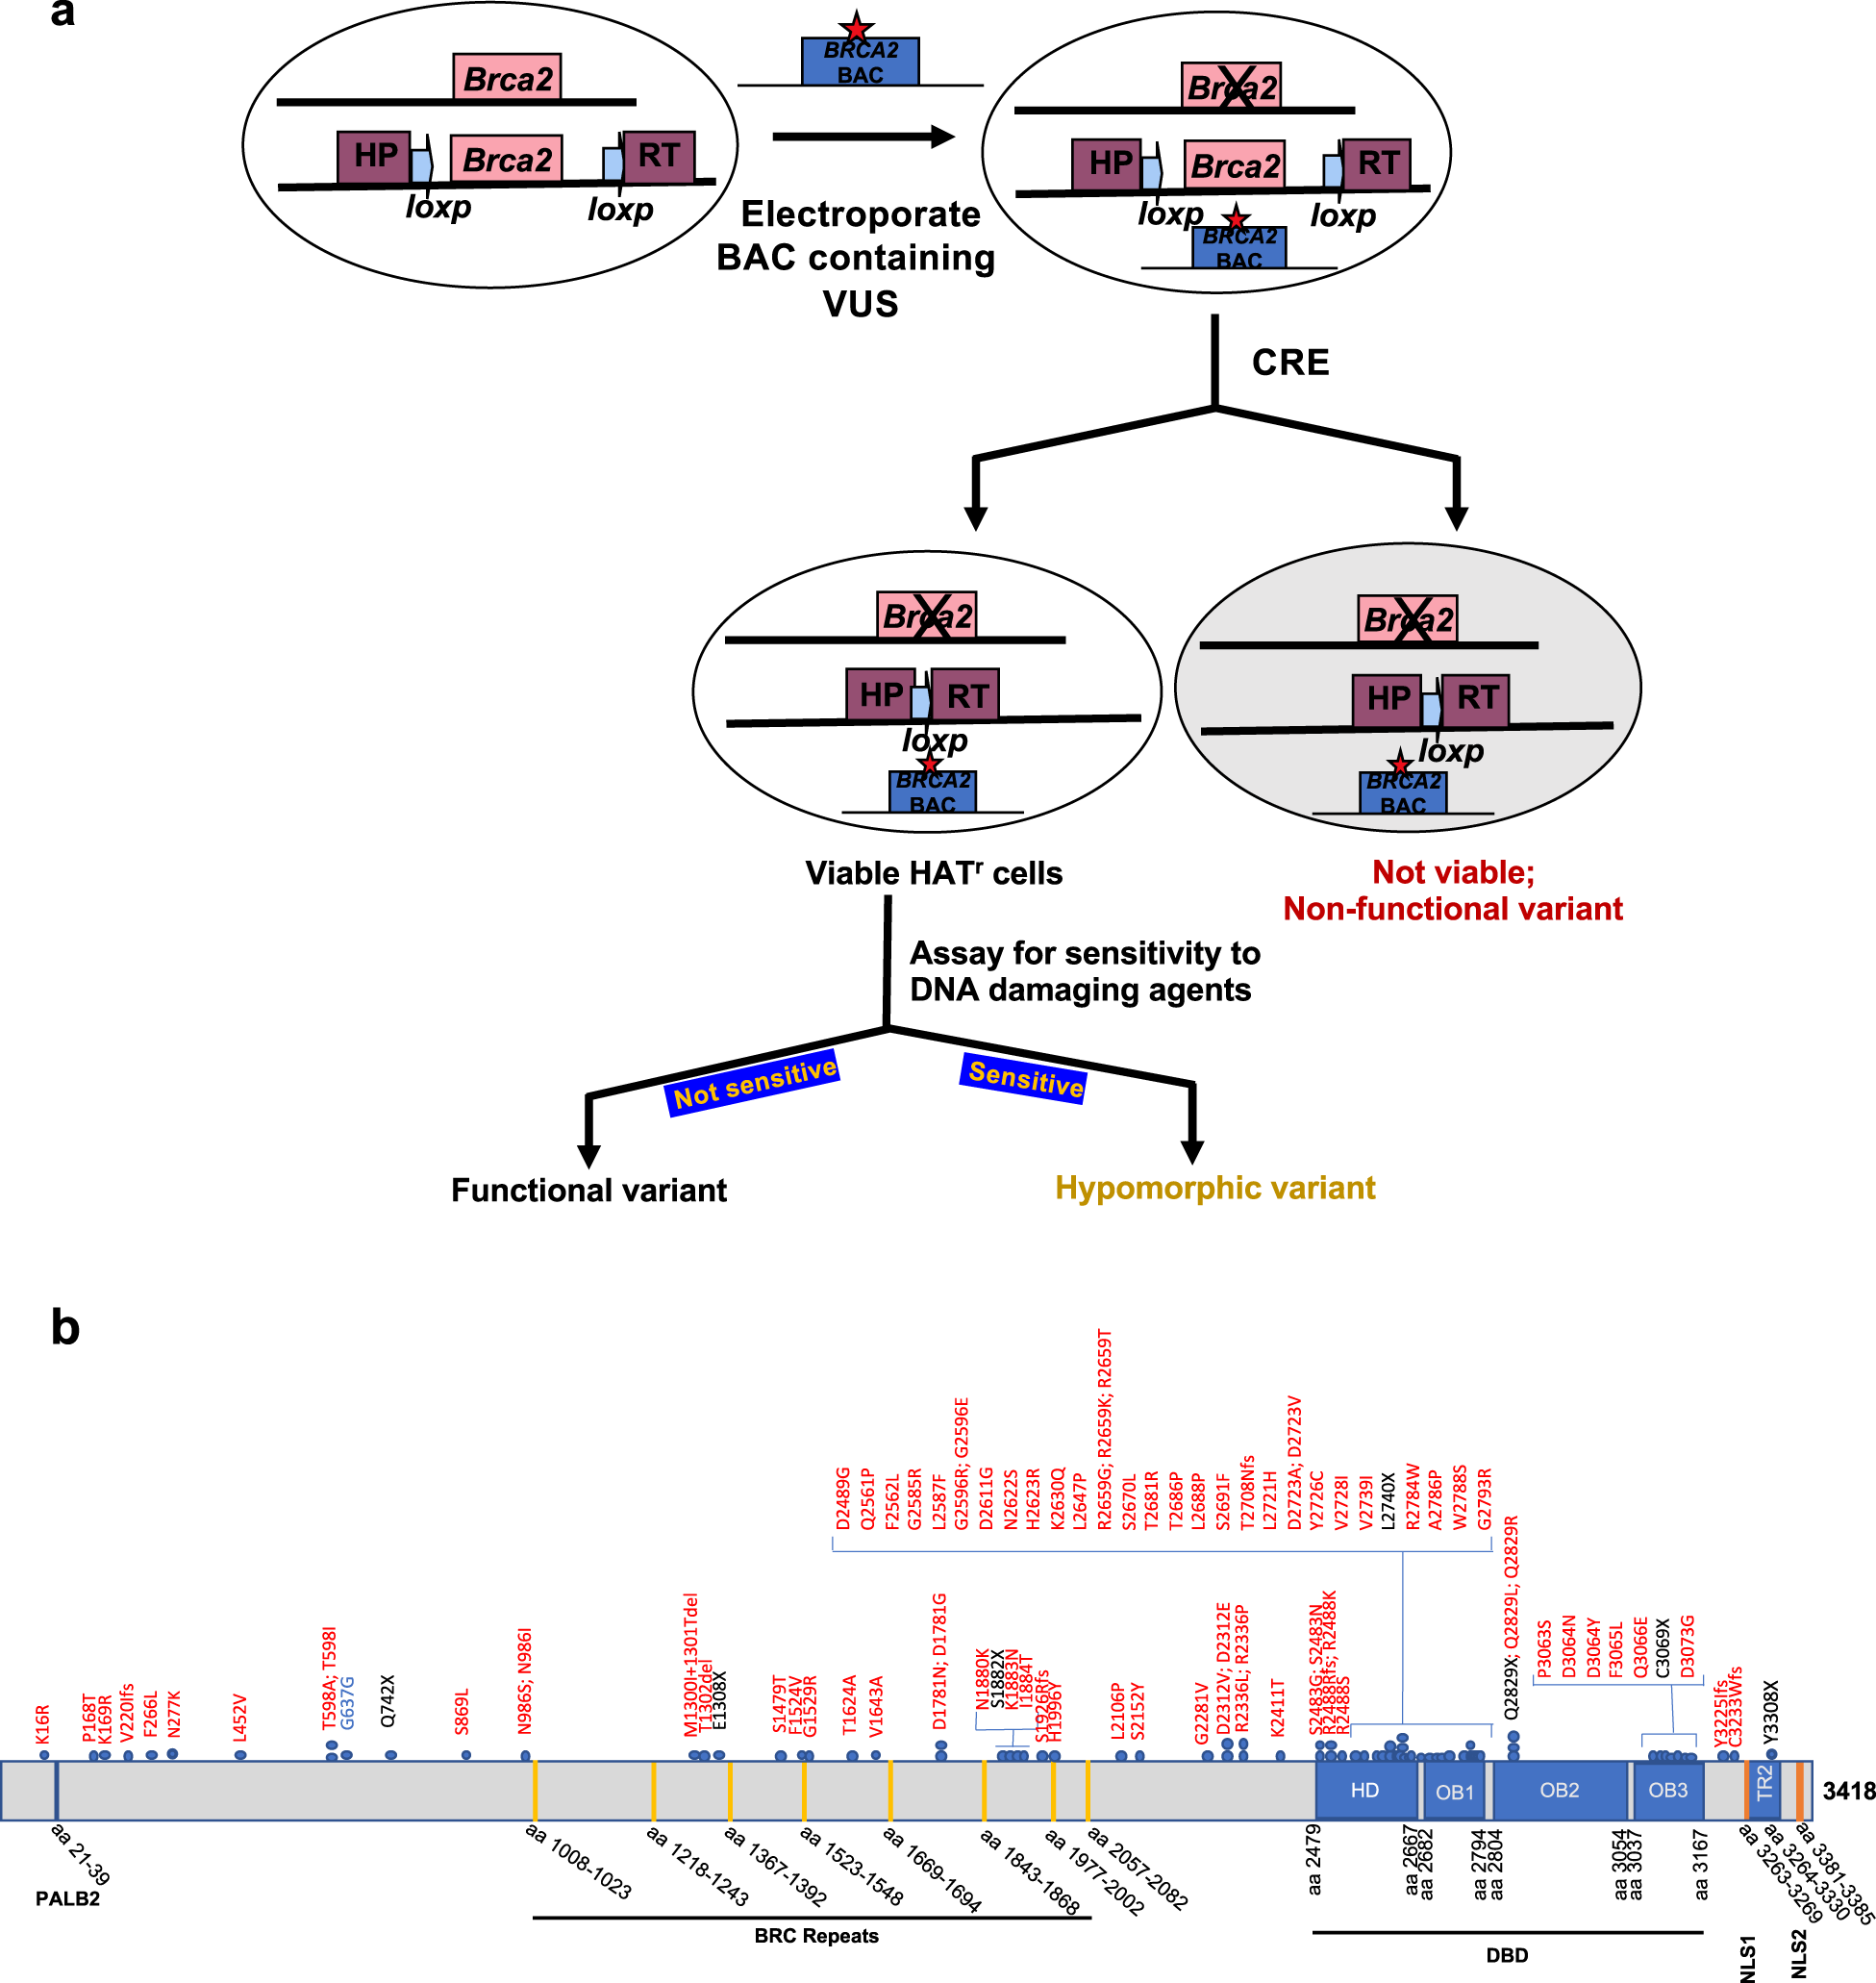 A computational model for classification of BRCA2 variants using mouse  embryonic stem cell-based functional assays | npj Genomic Medicine